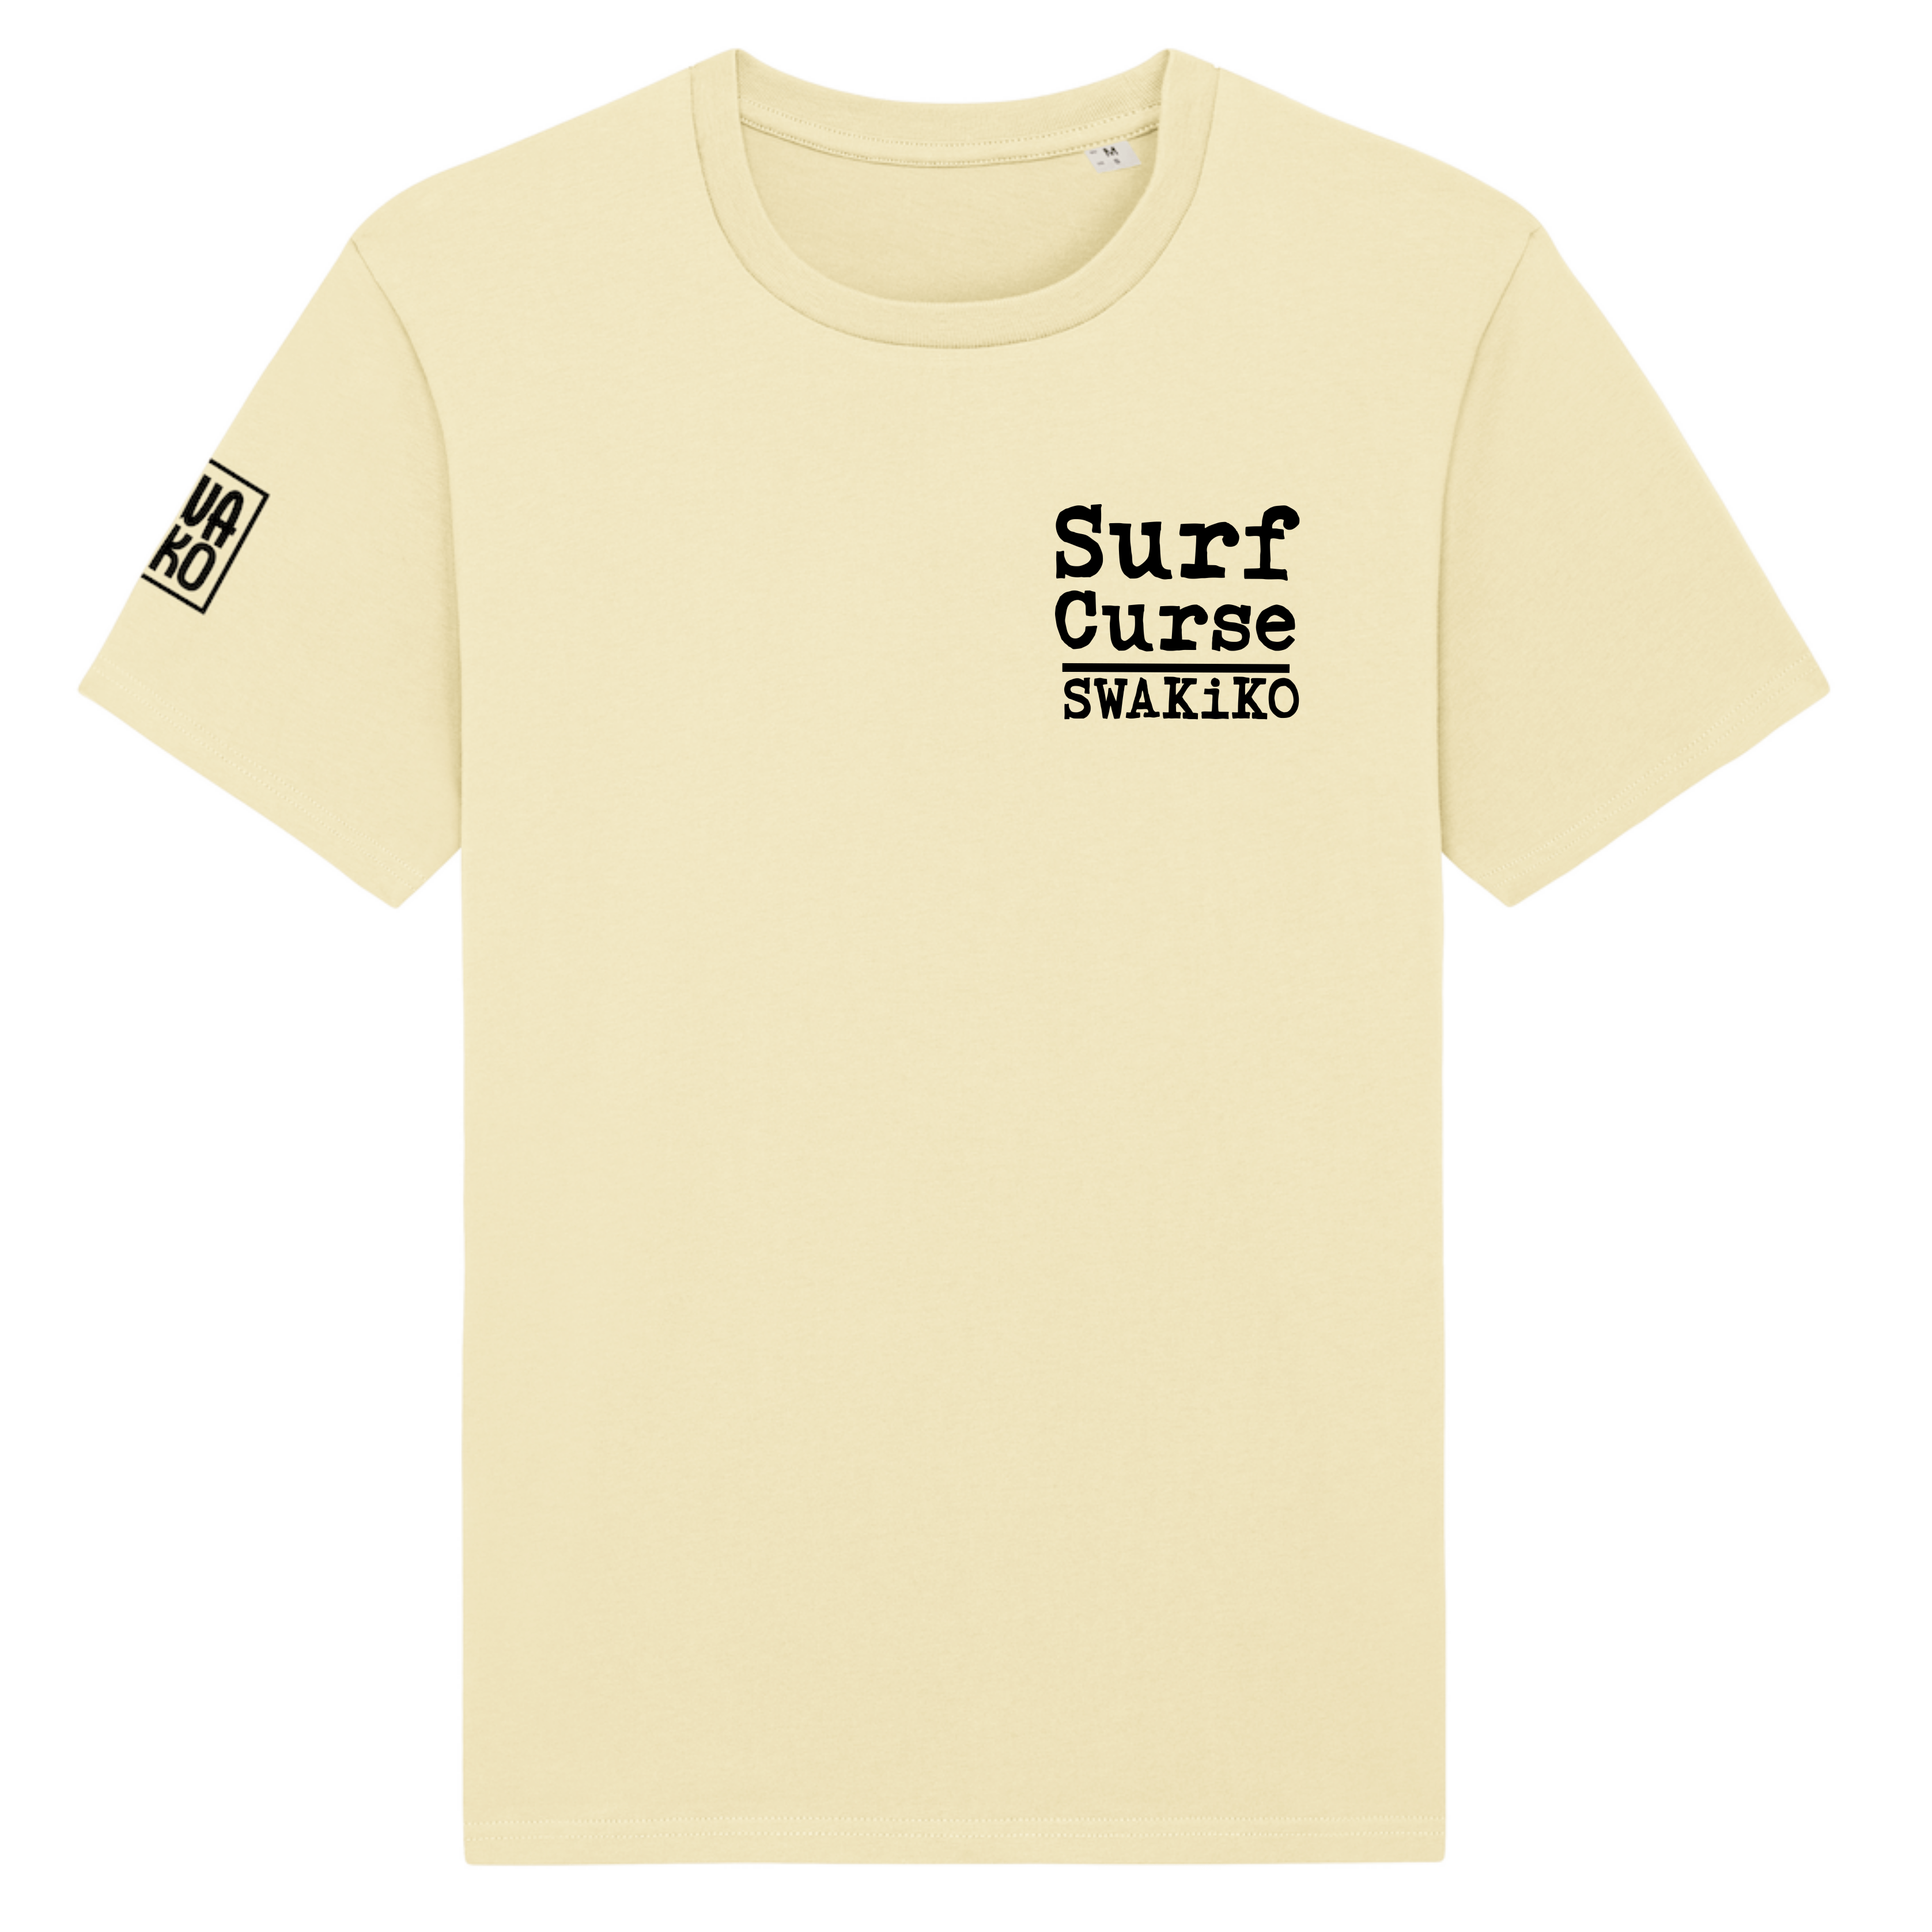 Surf Curse Surf T-shirt yellow front